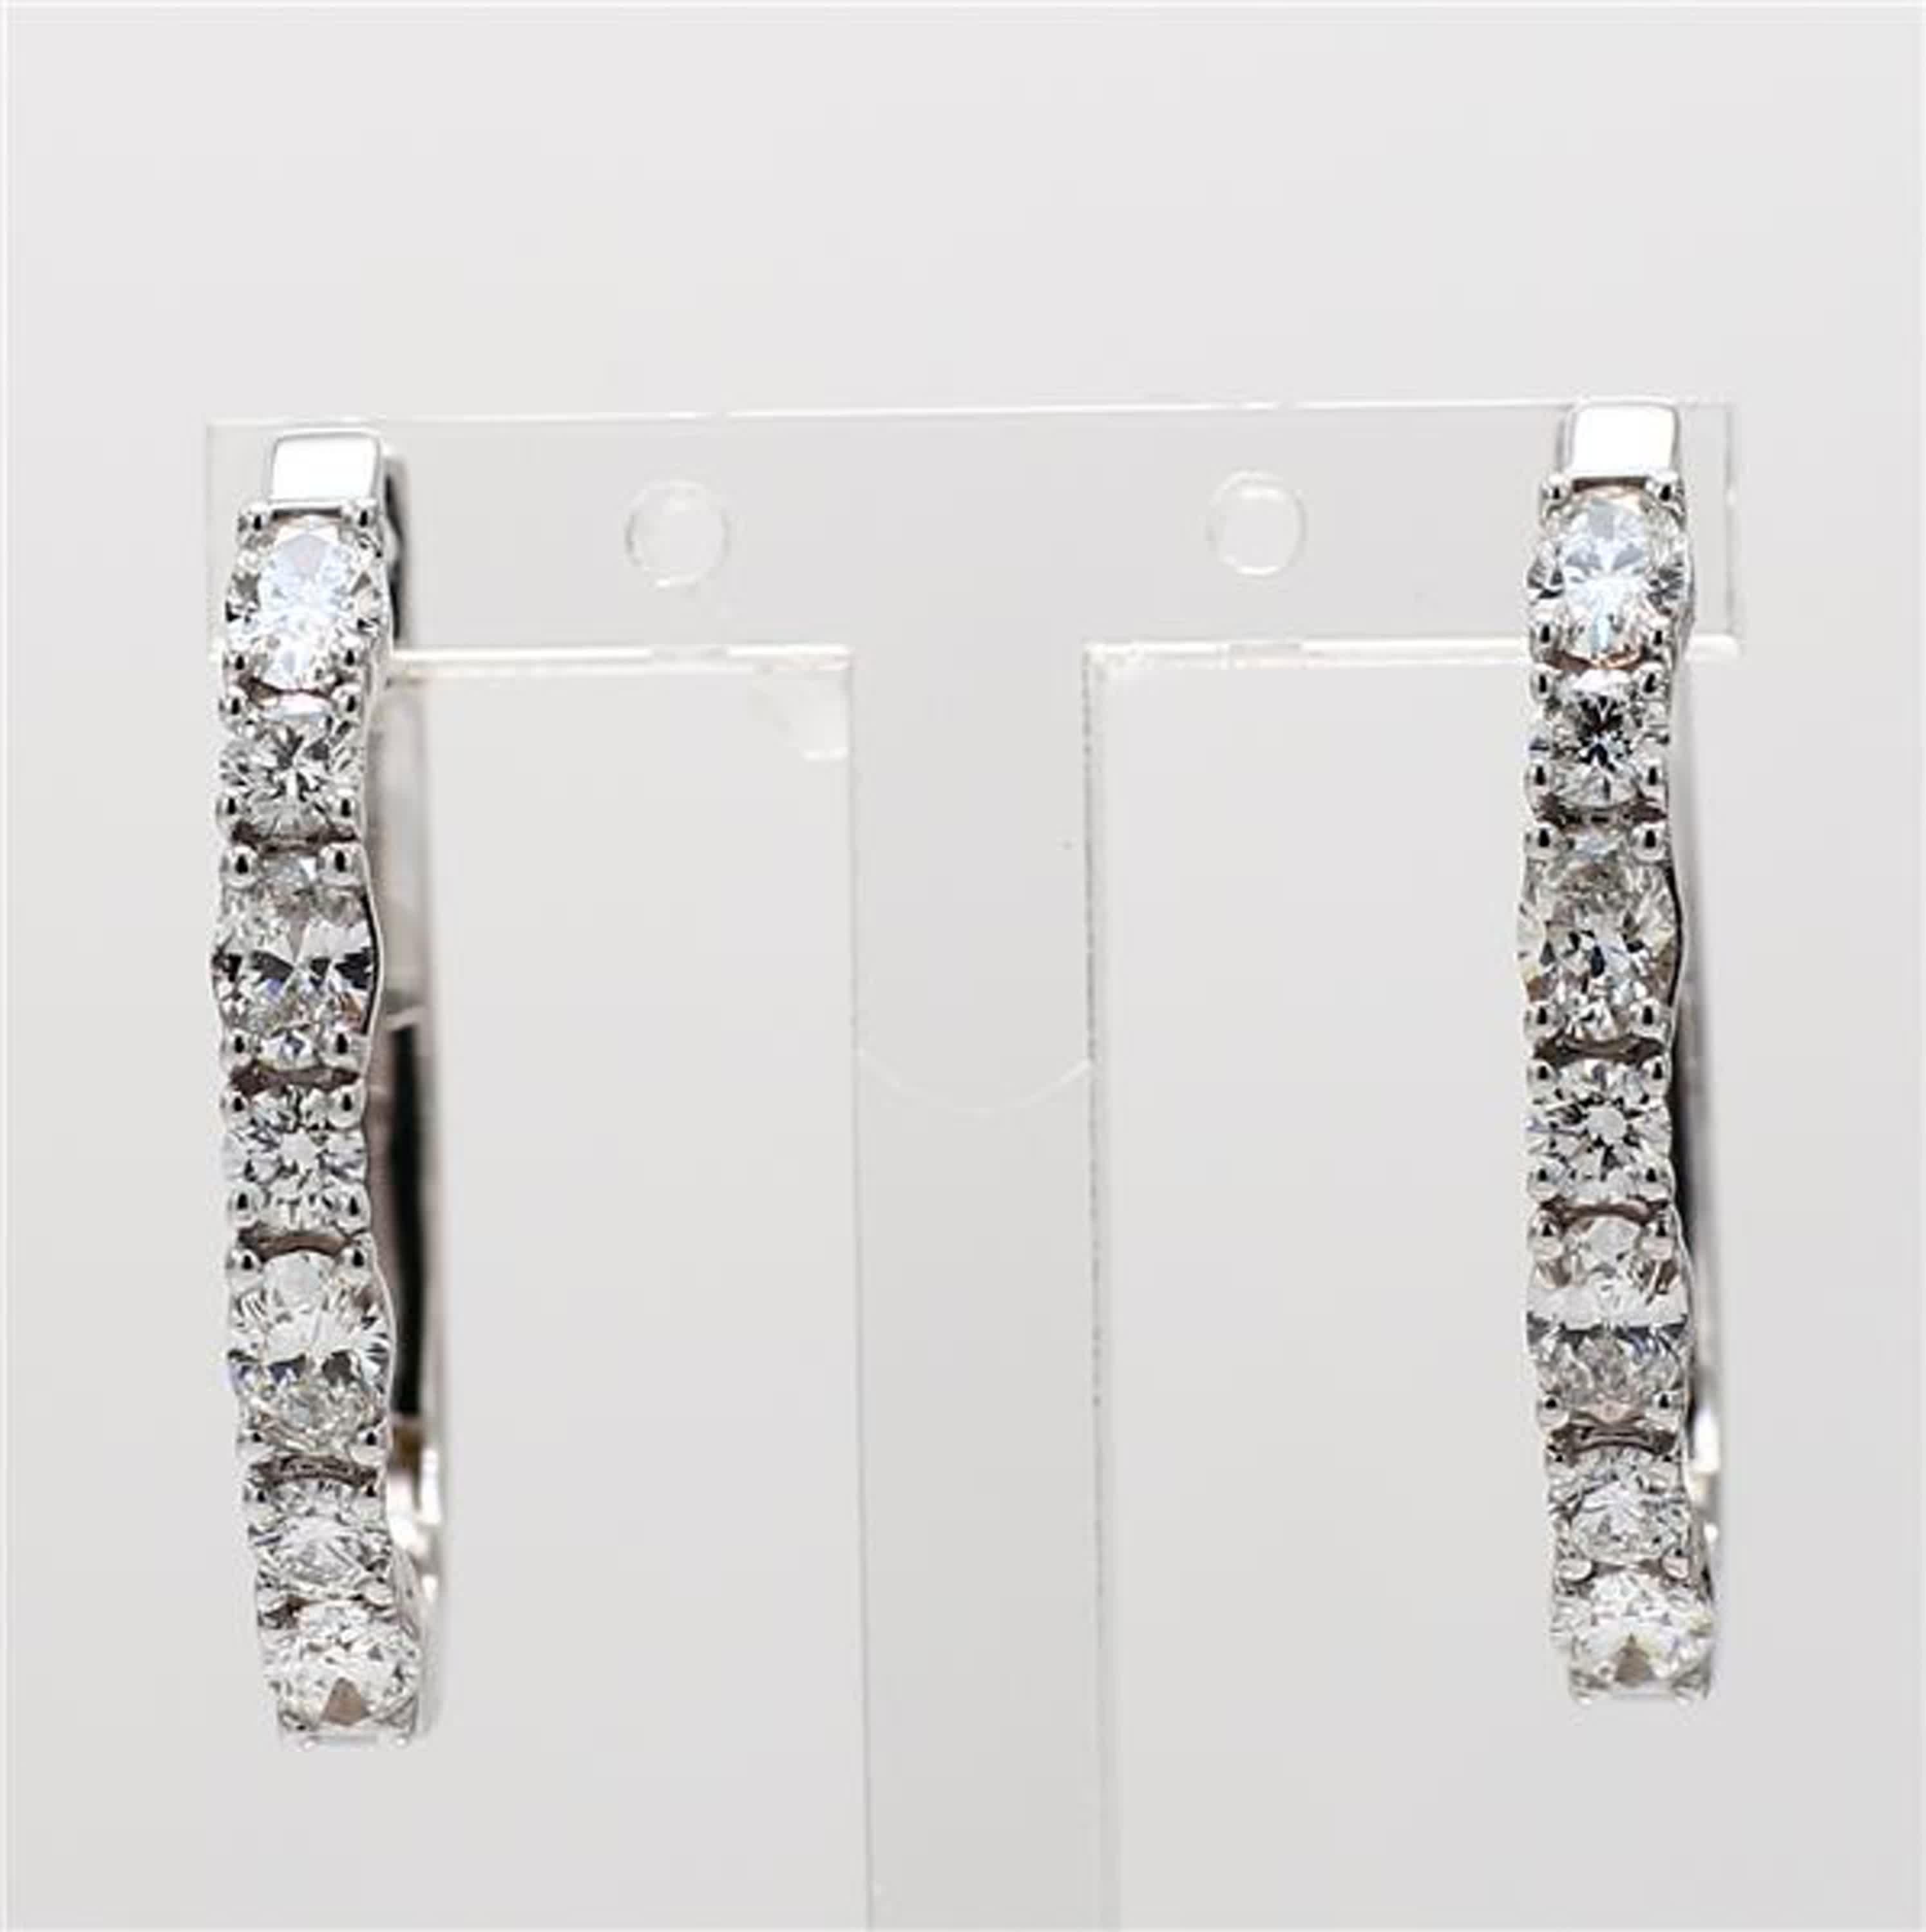 RareGemWorld's classic diamond earrings. Mounted in a beautiful 18K White Gold setting with natural oval cut white diamond and natural round cut white diamonds. These earrings are guaranteed to impress and enhance your personal collection!

Total